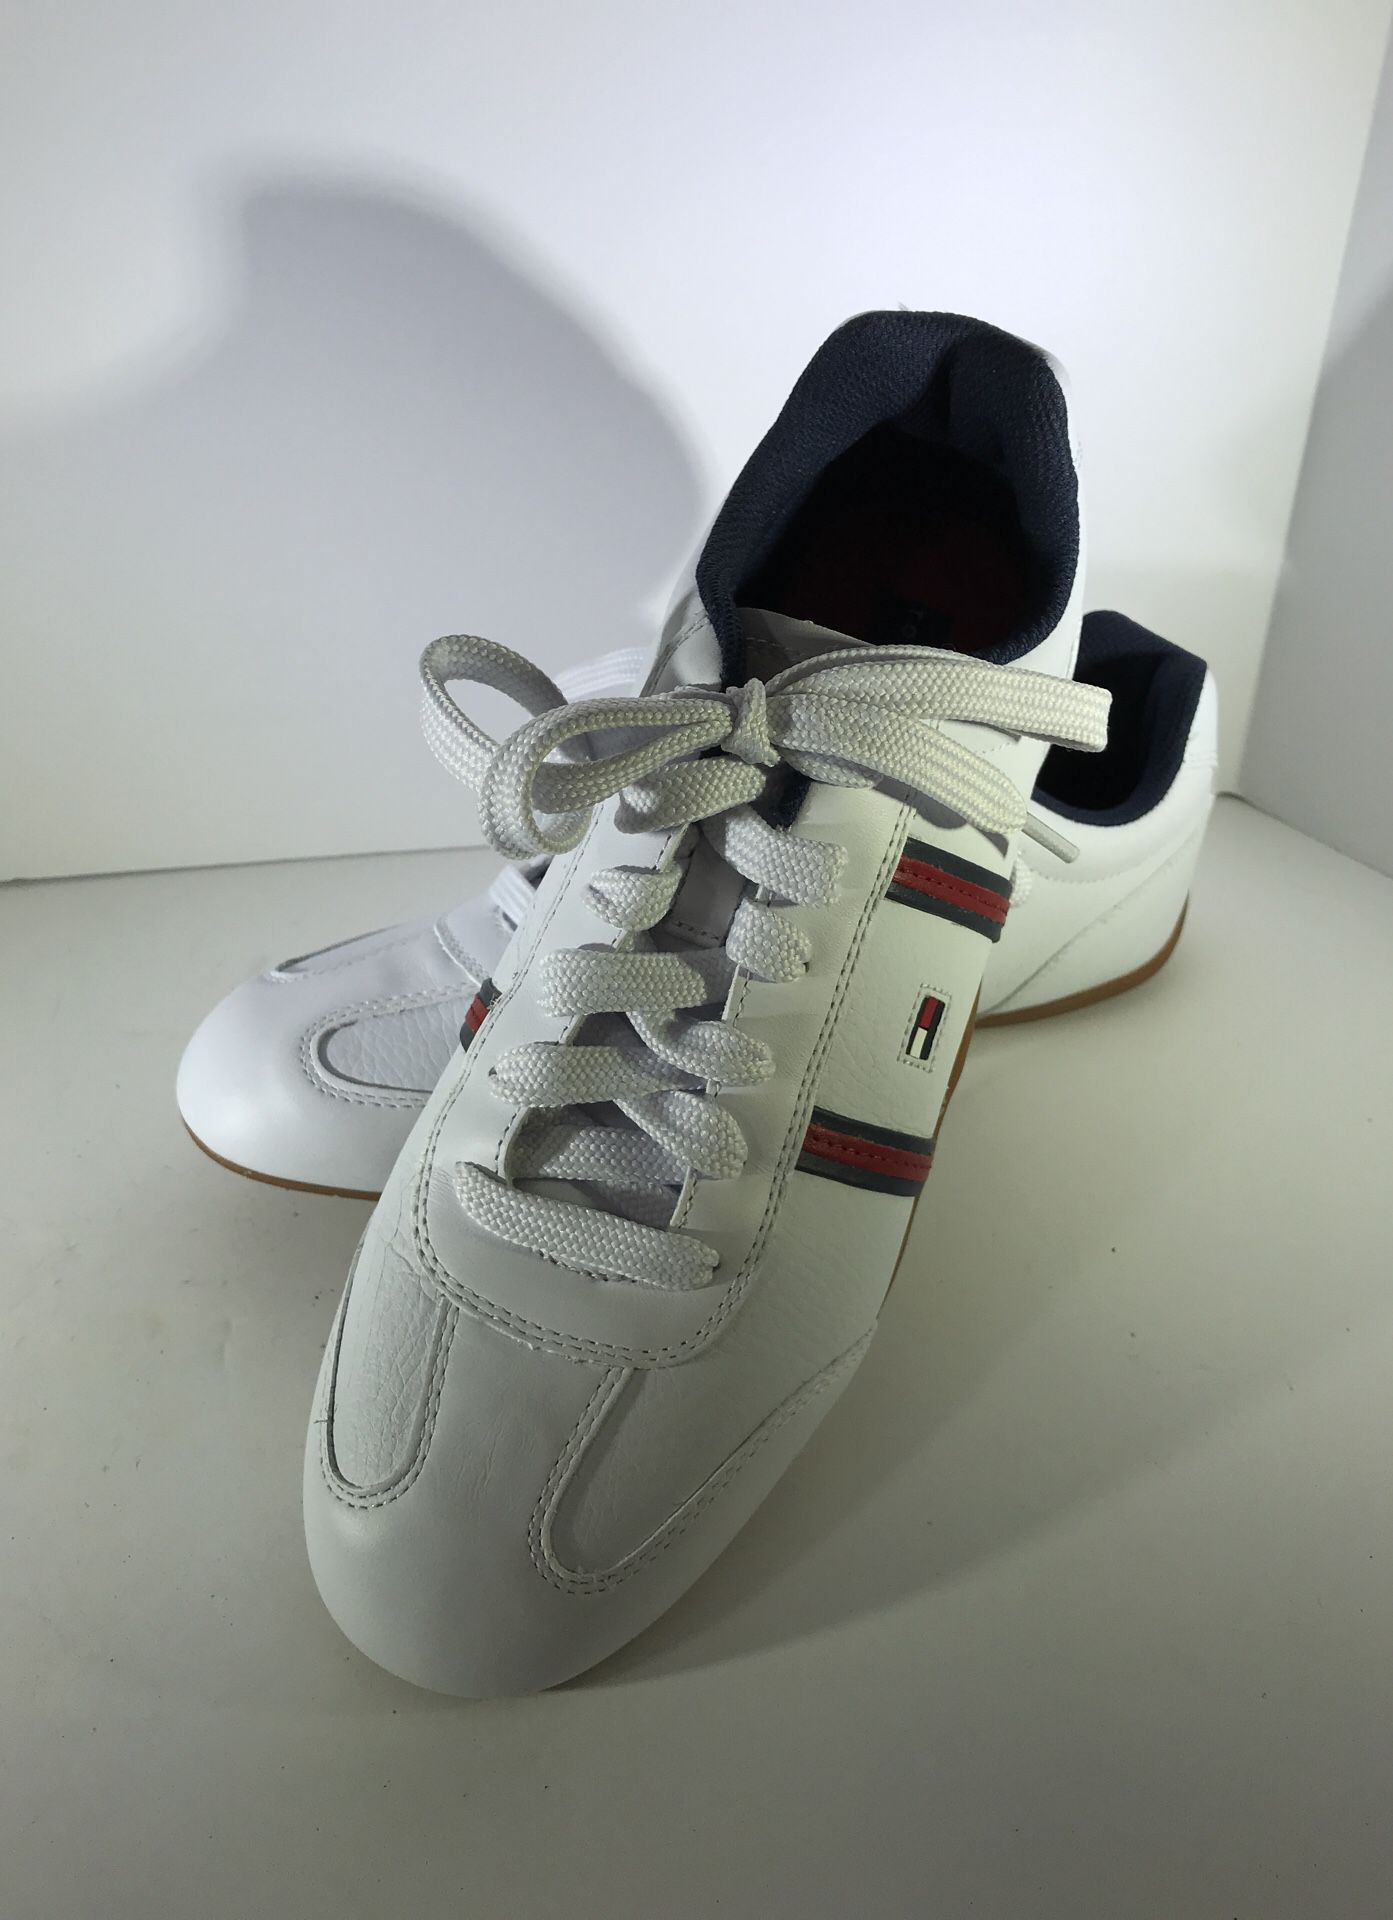 Retro Tommy Hilfiger Sneakers Men's Size 9M for Sale in Clayton, NC - OfferUp